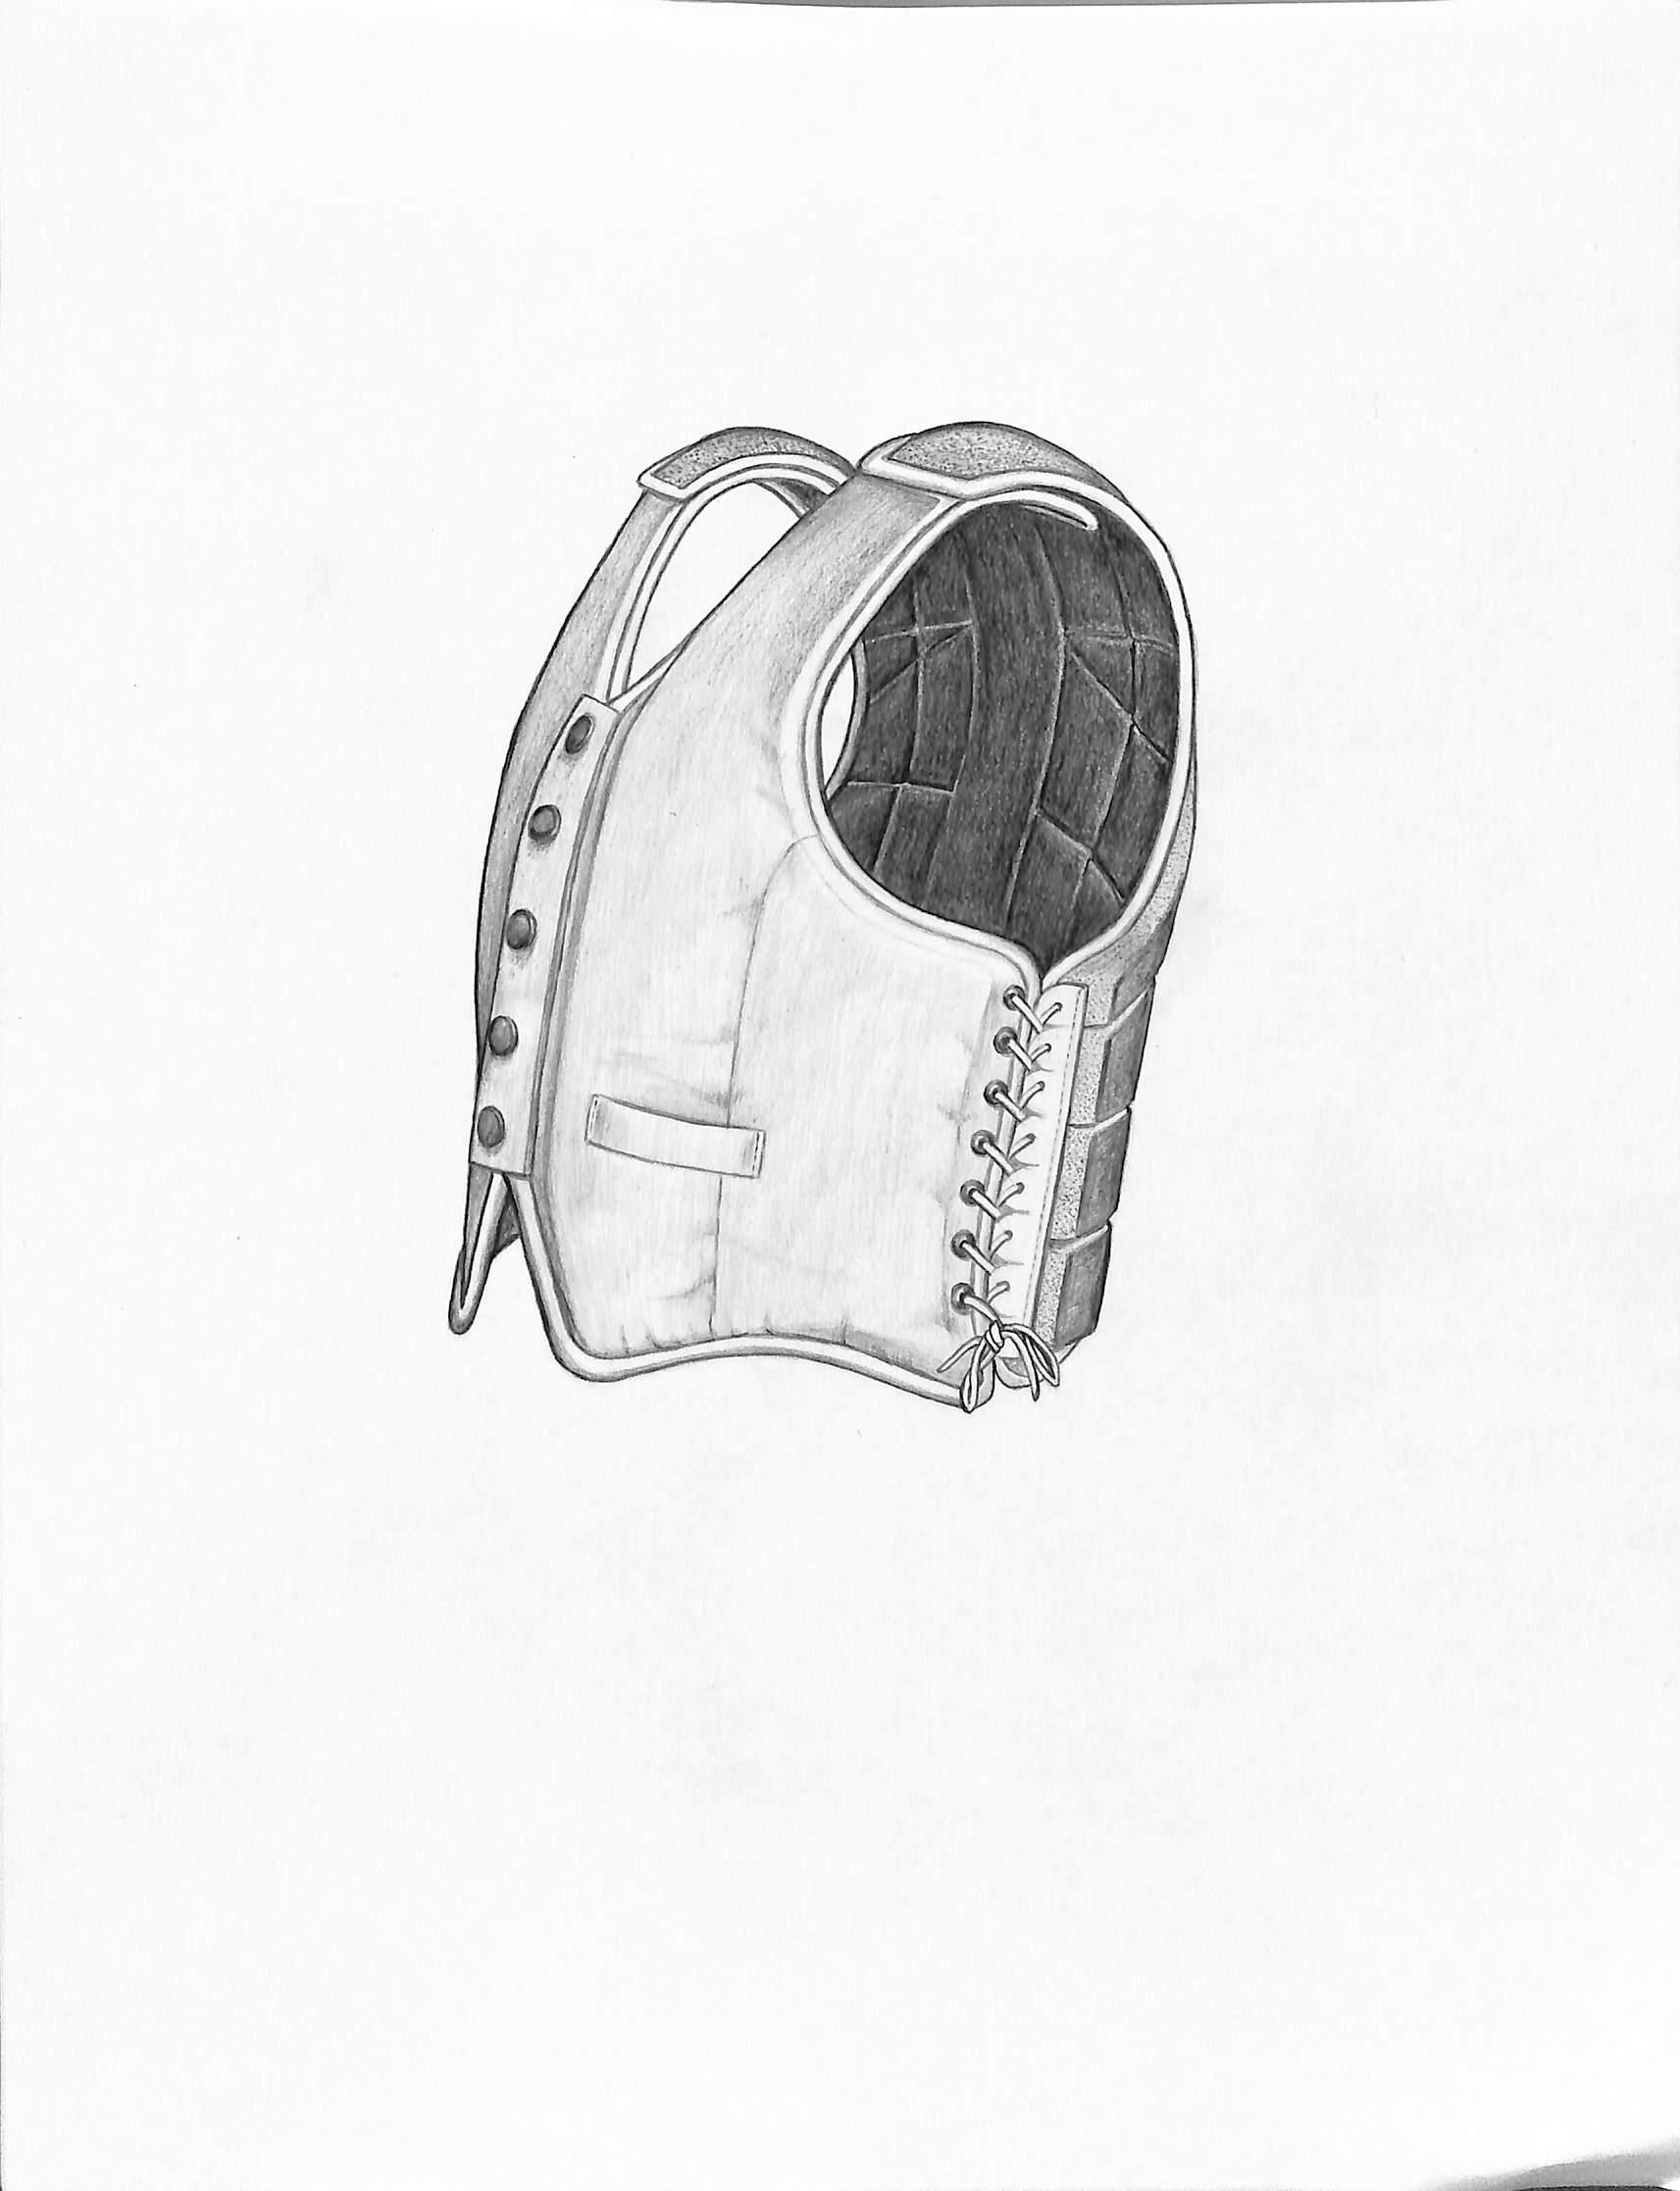 Canary Safety Vest Graphite Drawing - Art by Unknown